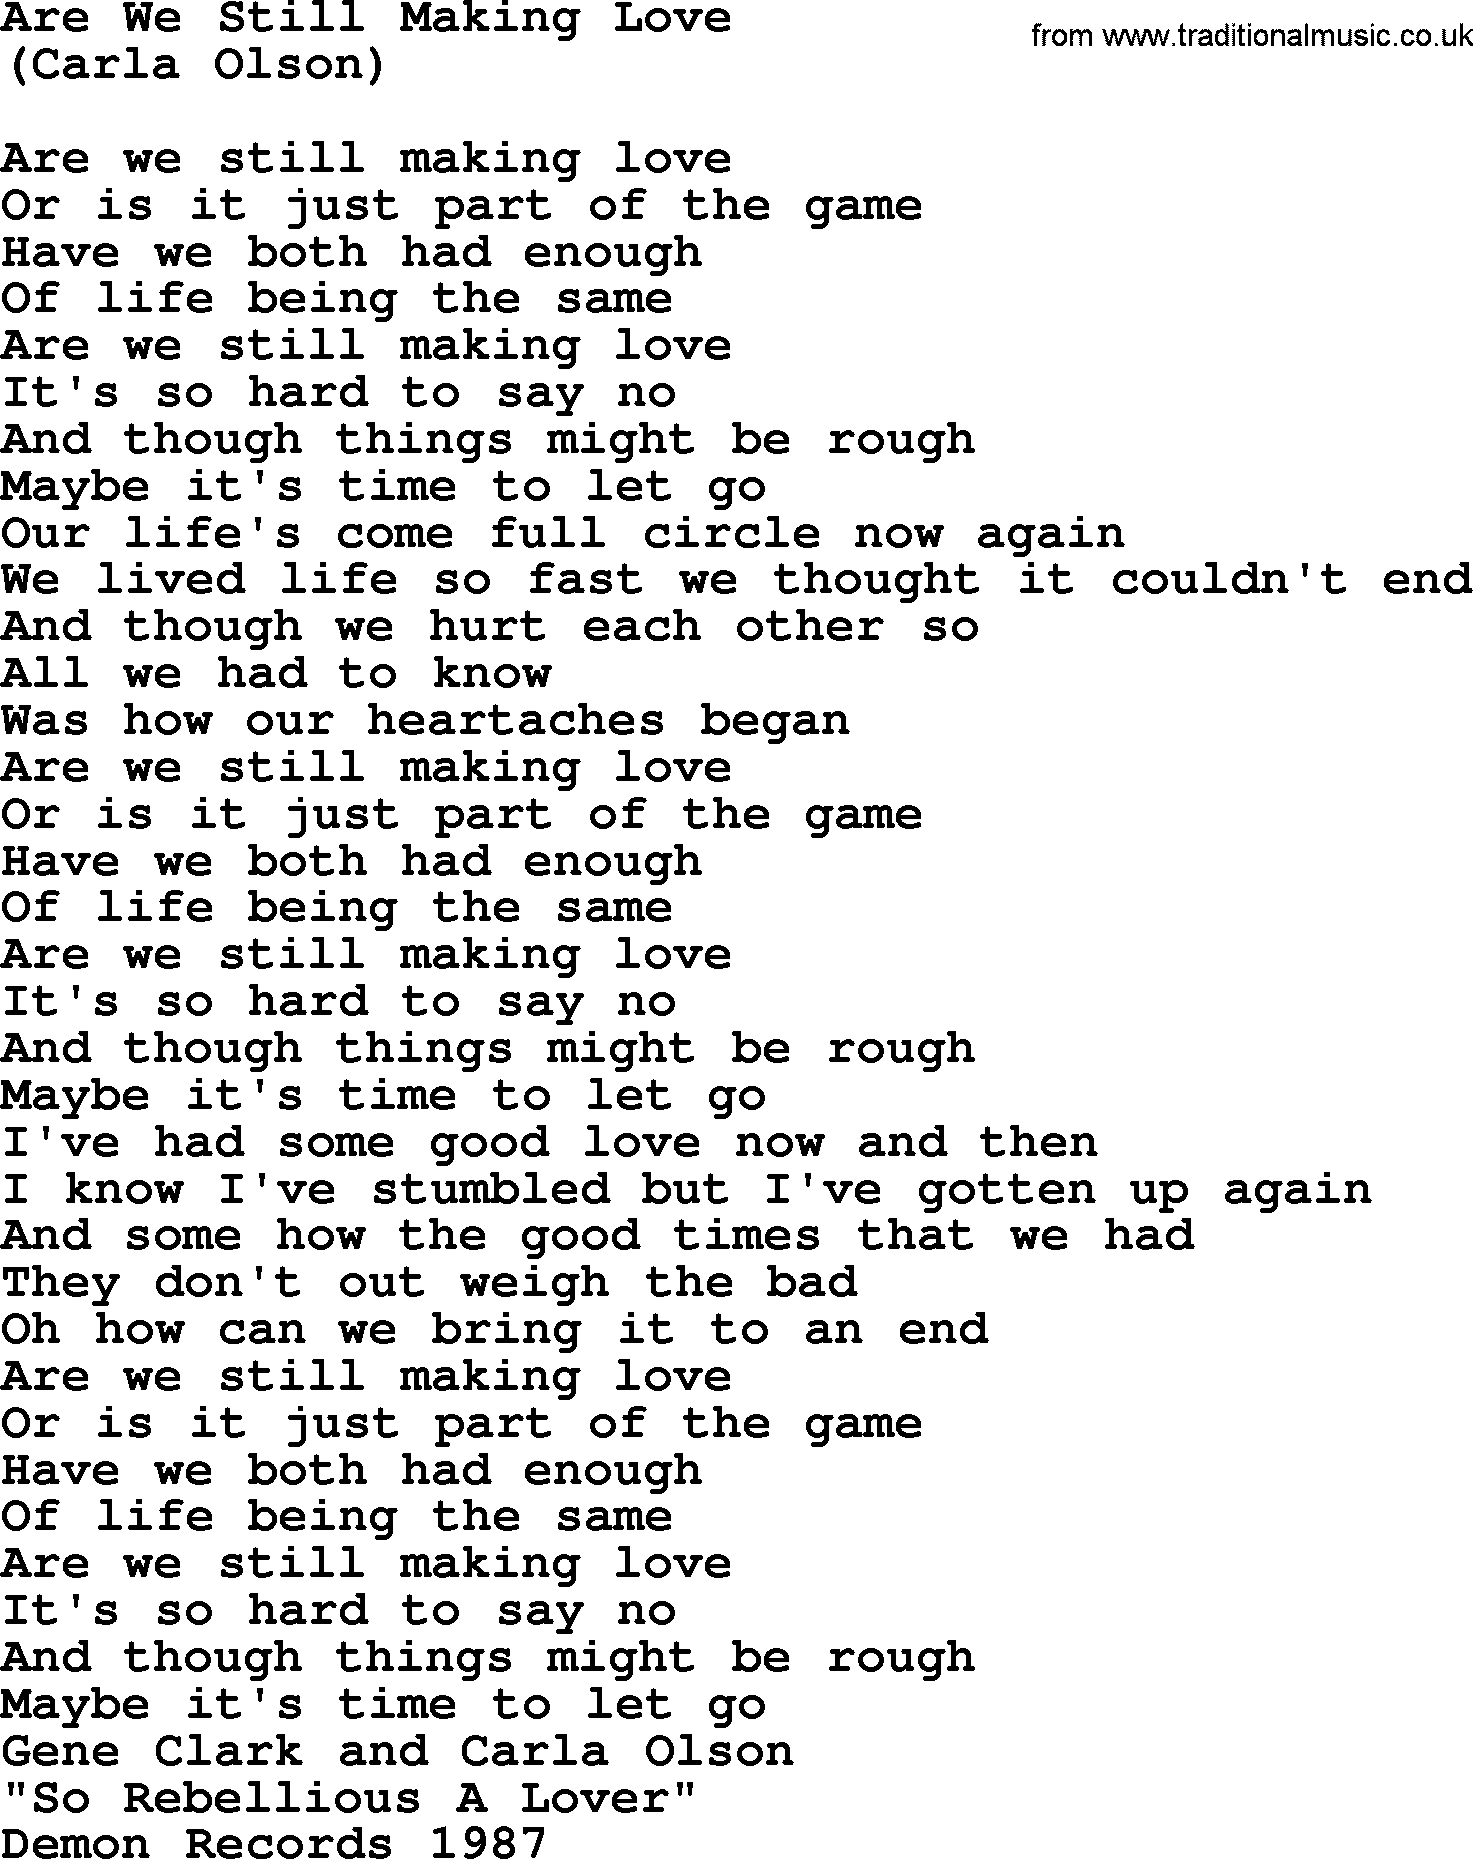 The Byrds song Are We Still Making Love, lyrics